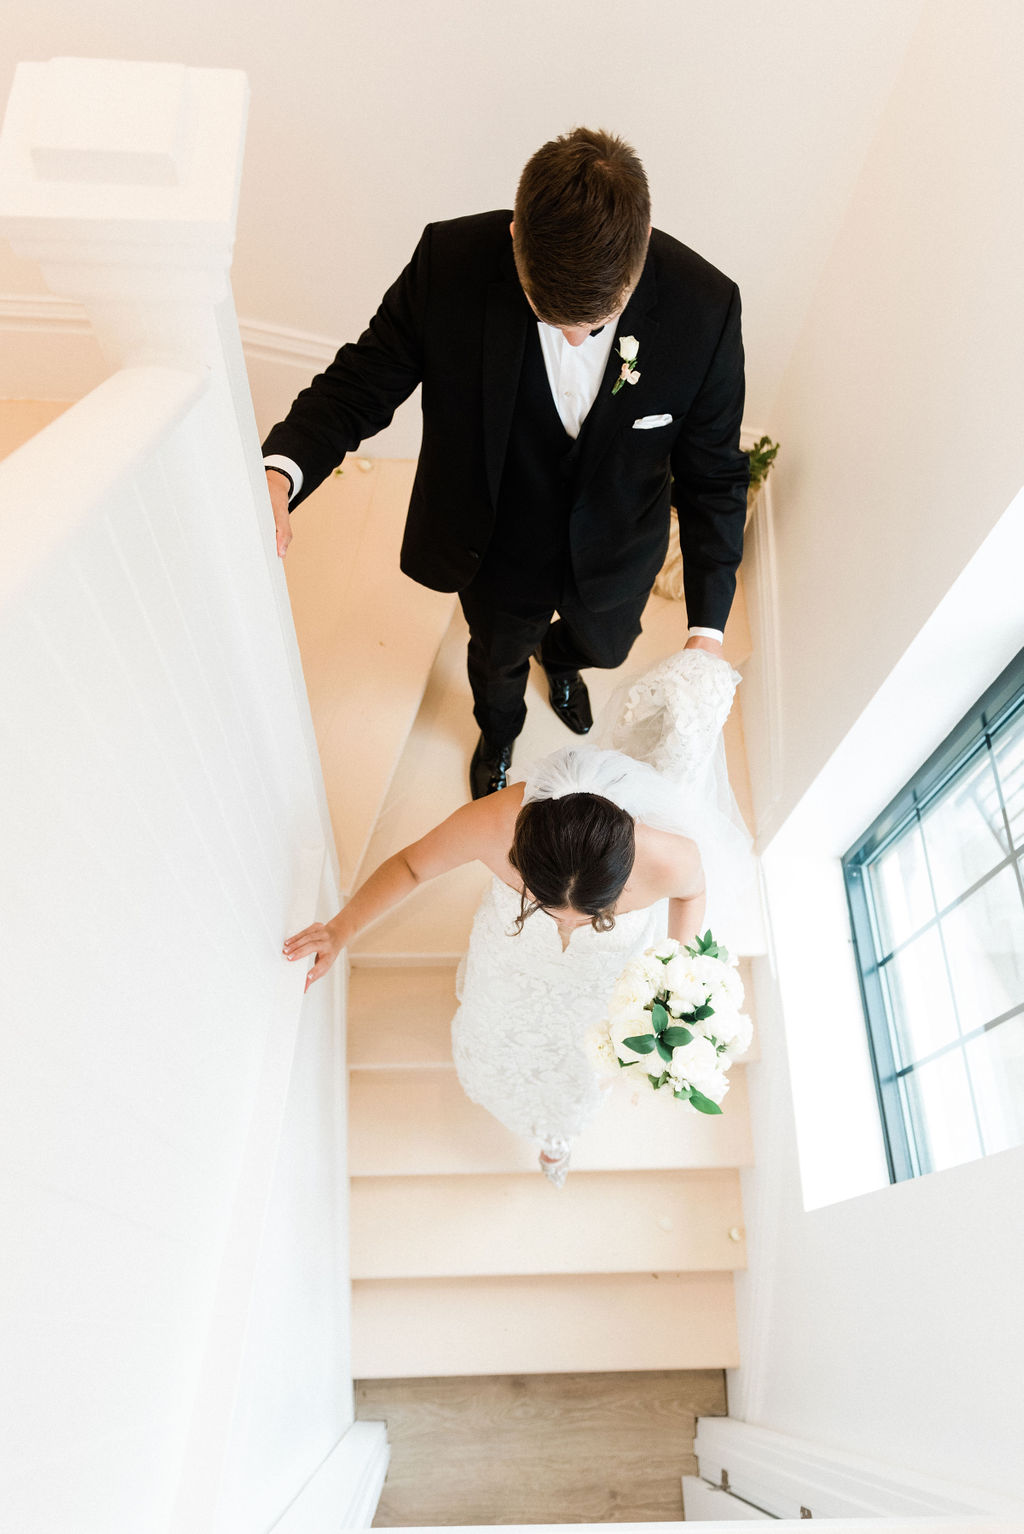 Couple walking down the stairs after their wedding at the Loft 310 Chapel